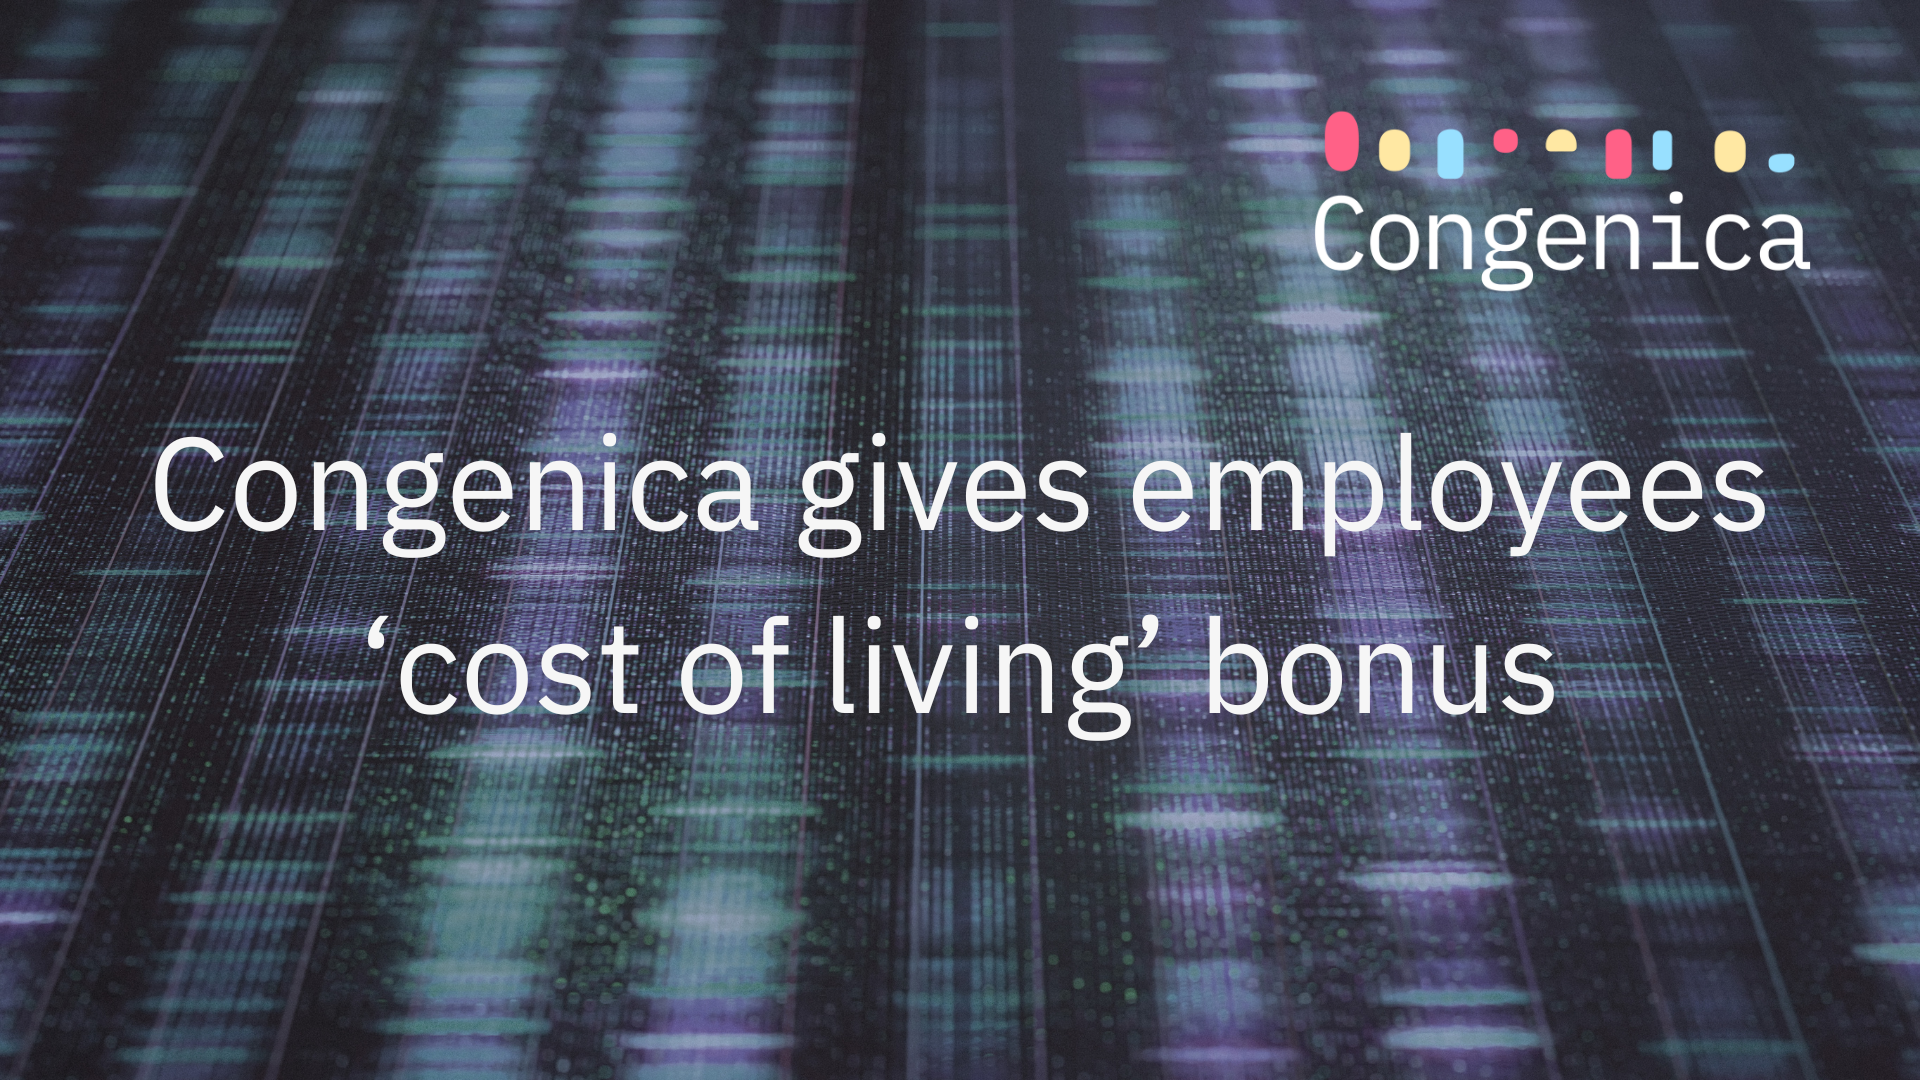 Congenica gives employees ‘cost of living’ bonus